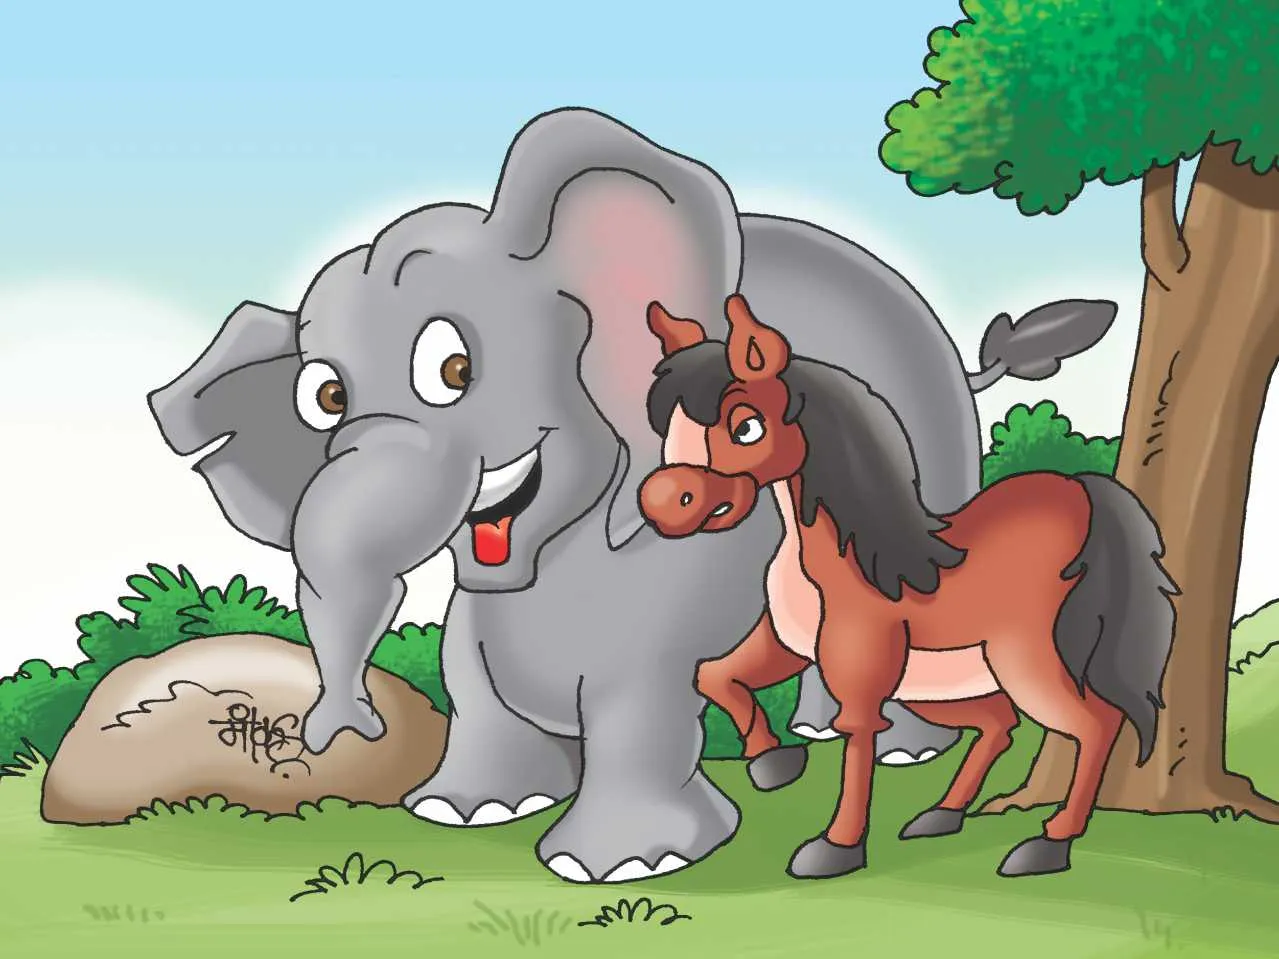 Elephant and Horse in jungle cartoon image